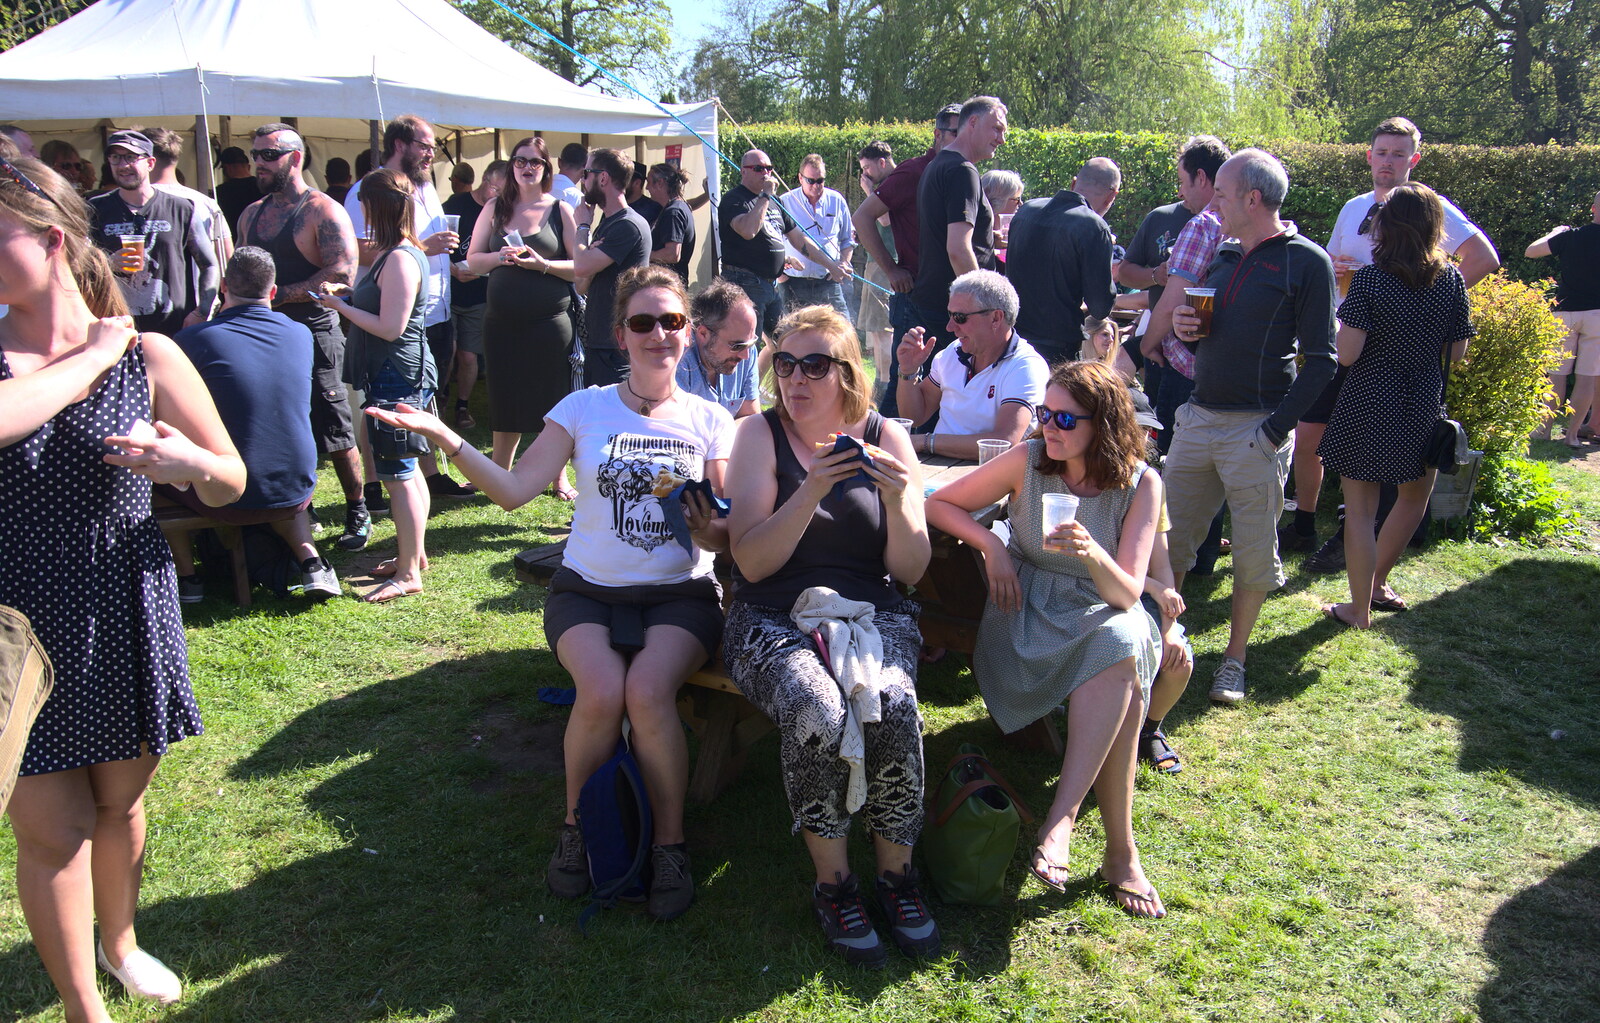 Suey, Sarah and Isobel on a bench from Beer, Bikes and Bands, Burston Crown, Burston, Norfolk - 6th May 2018